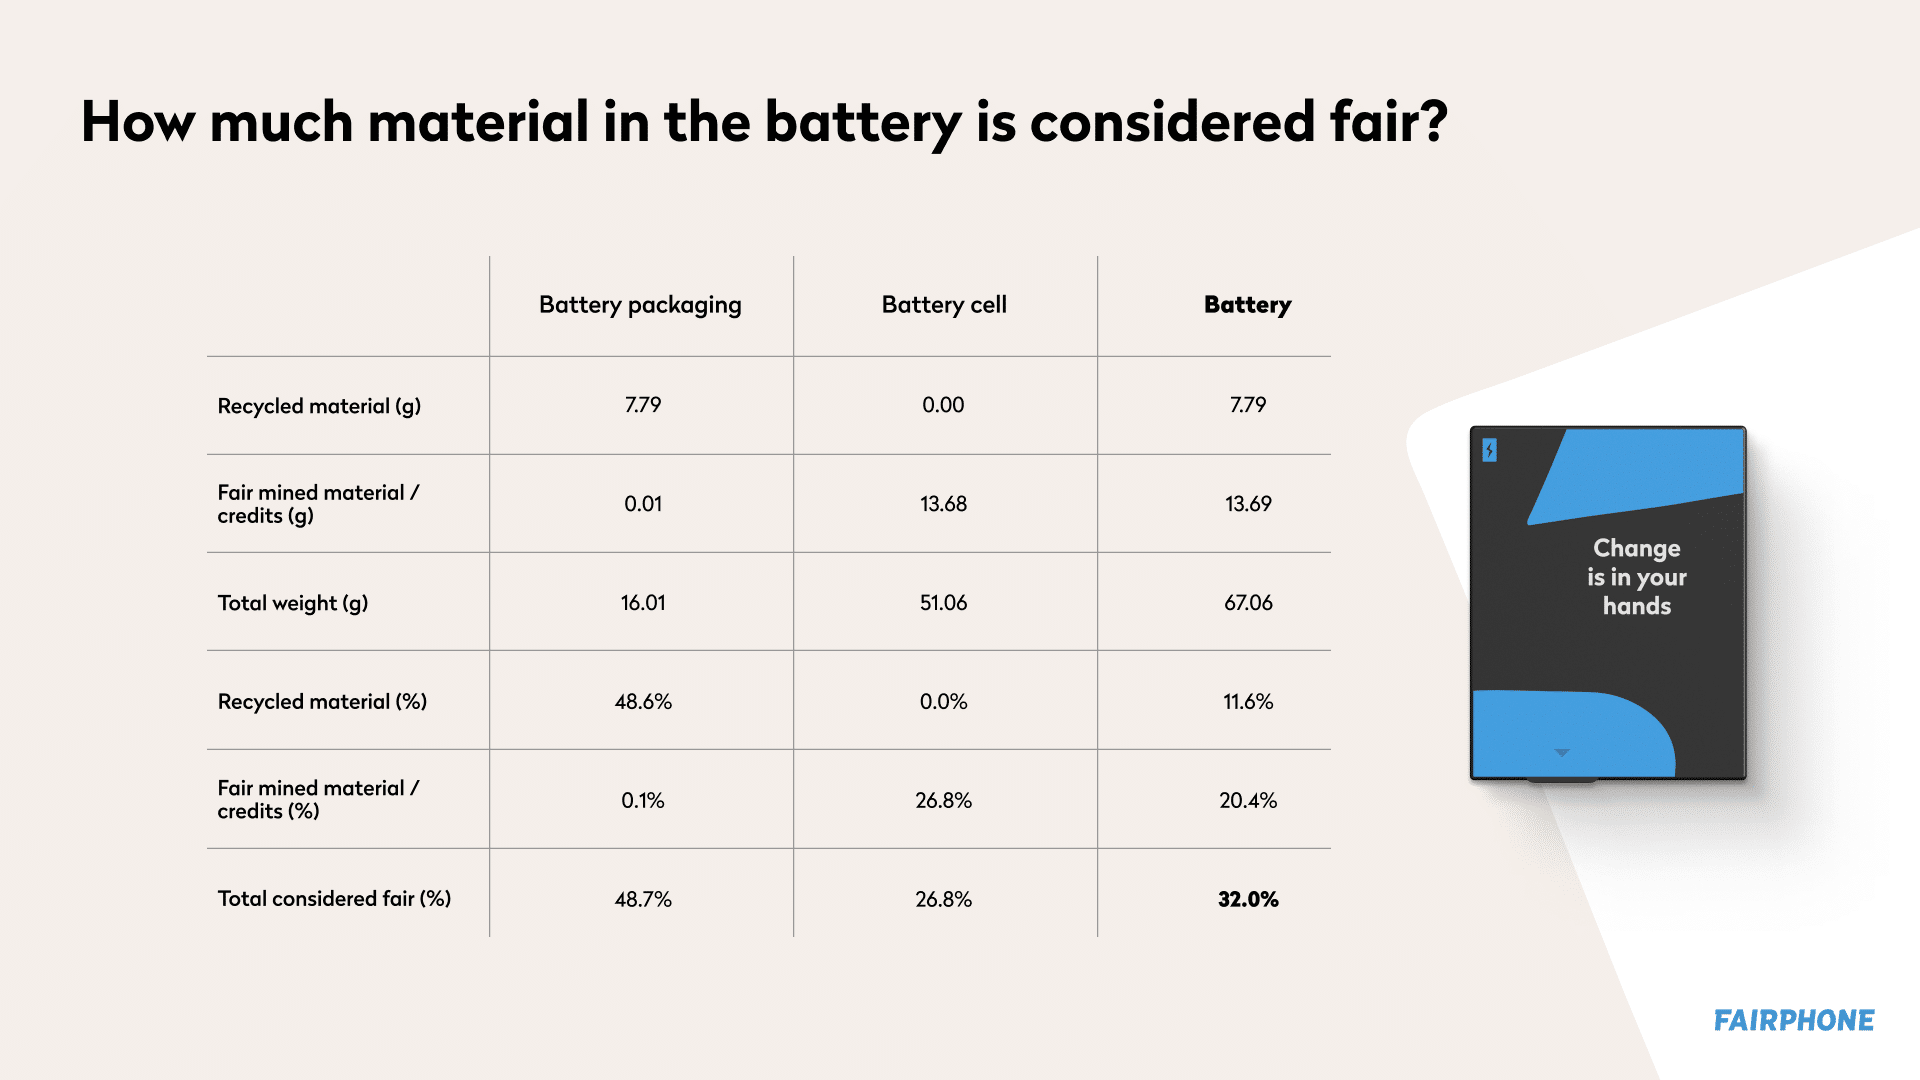 How much material in the battery is considered fair?